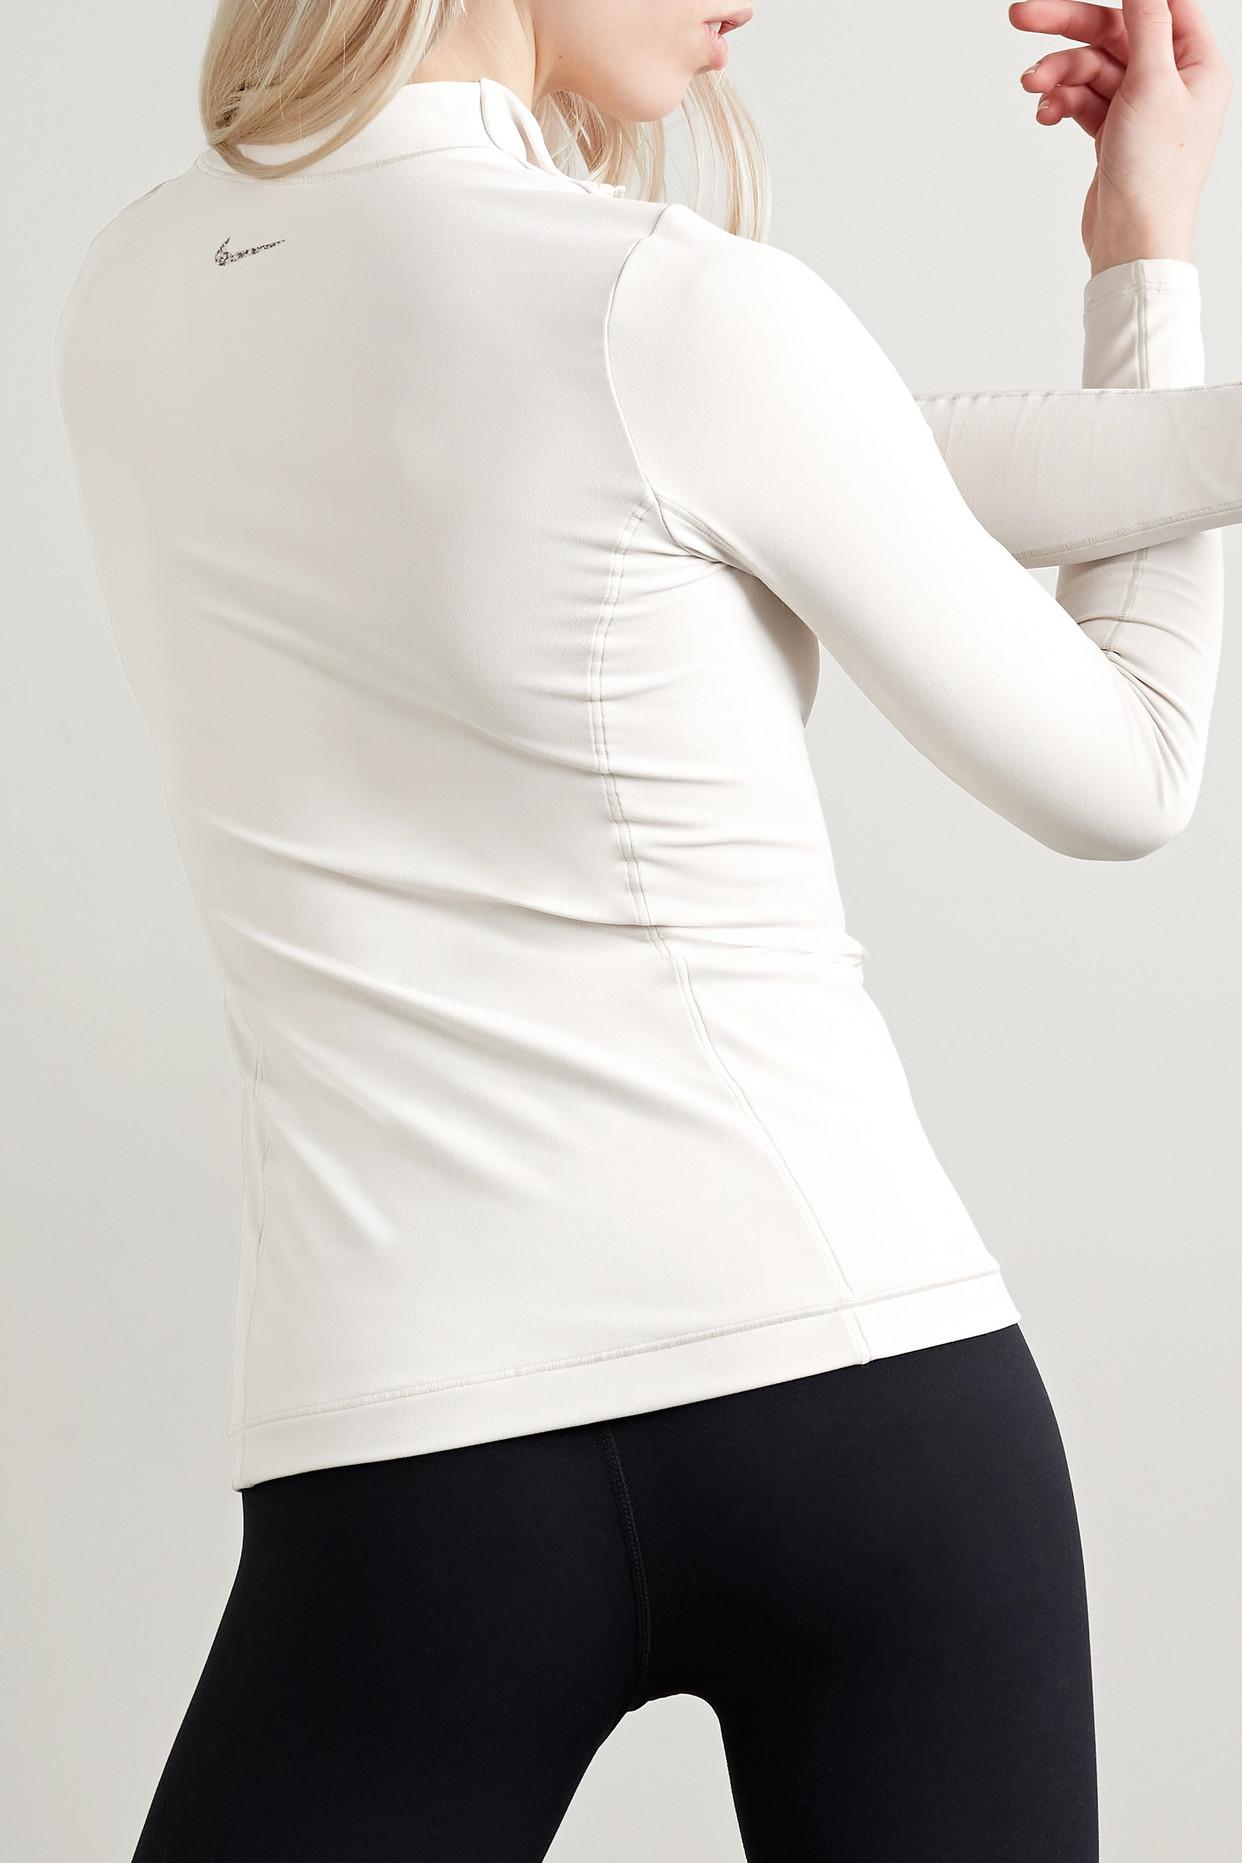 Nike Yoga Luxe Dri-fit Jacket in Natural